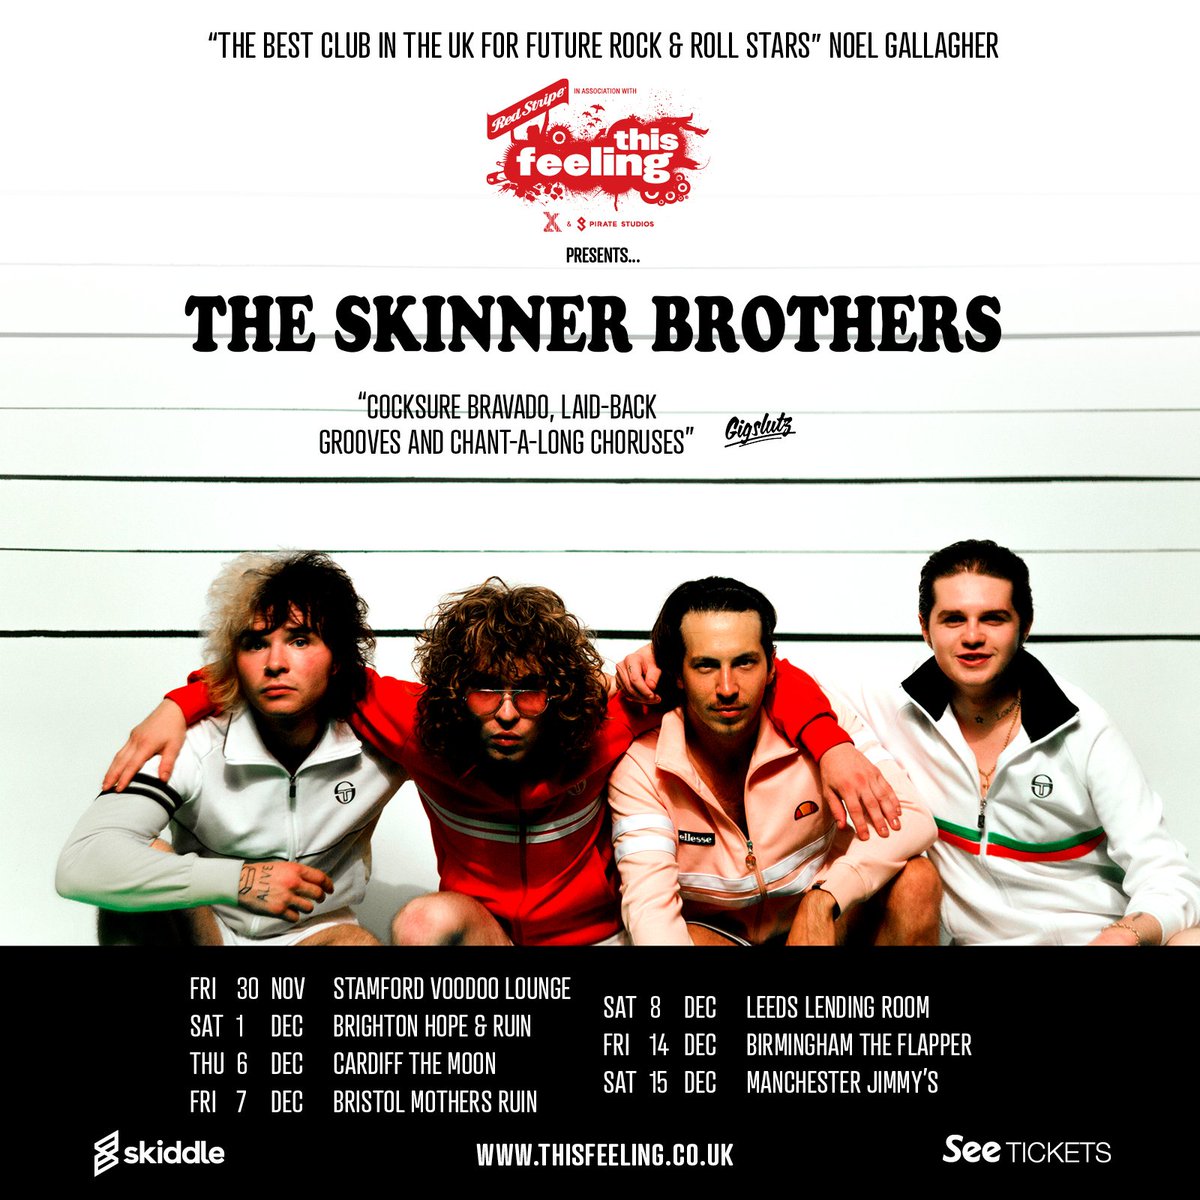 #JustAnnounced @TheSkinnerBros 'cocksure bravado, laid-back grooves and chant-a-long choruses' @Gigslutz_ Nov 30 @mamalizsbar Dec 01 @thehopeandruin 06 @TheMoonCardiff 07 @TheMothersRuin 08 @TomLendingRoom 14 @TheFlapperBrum 15 @jimmys_nq Tix on sale 10am Friday